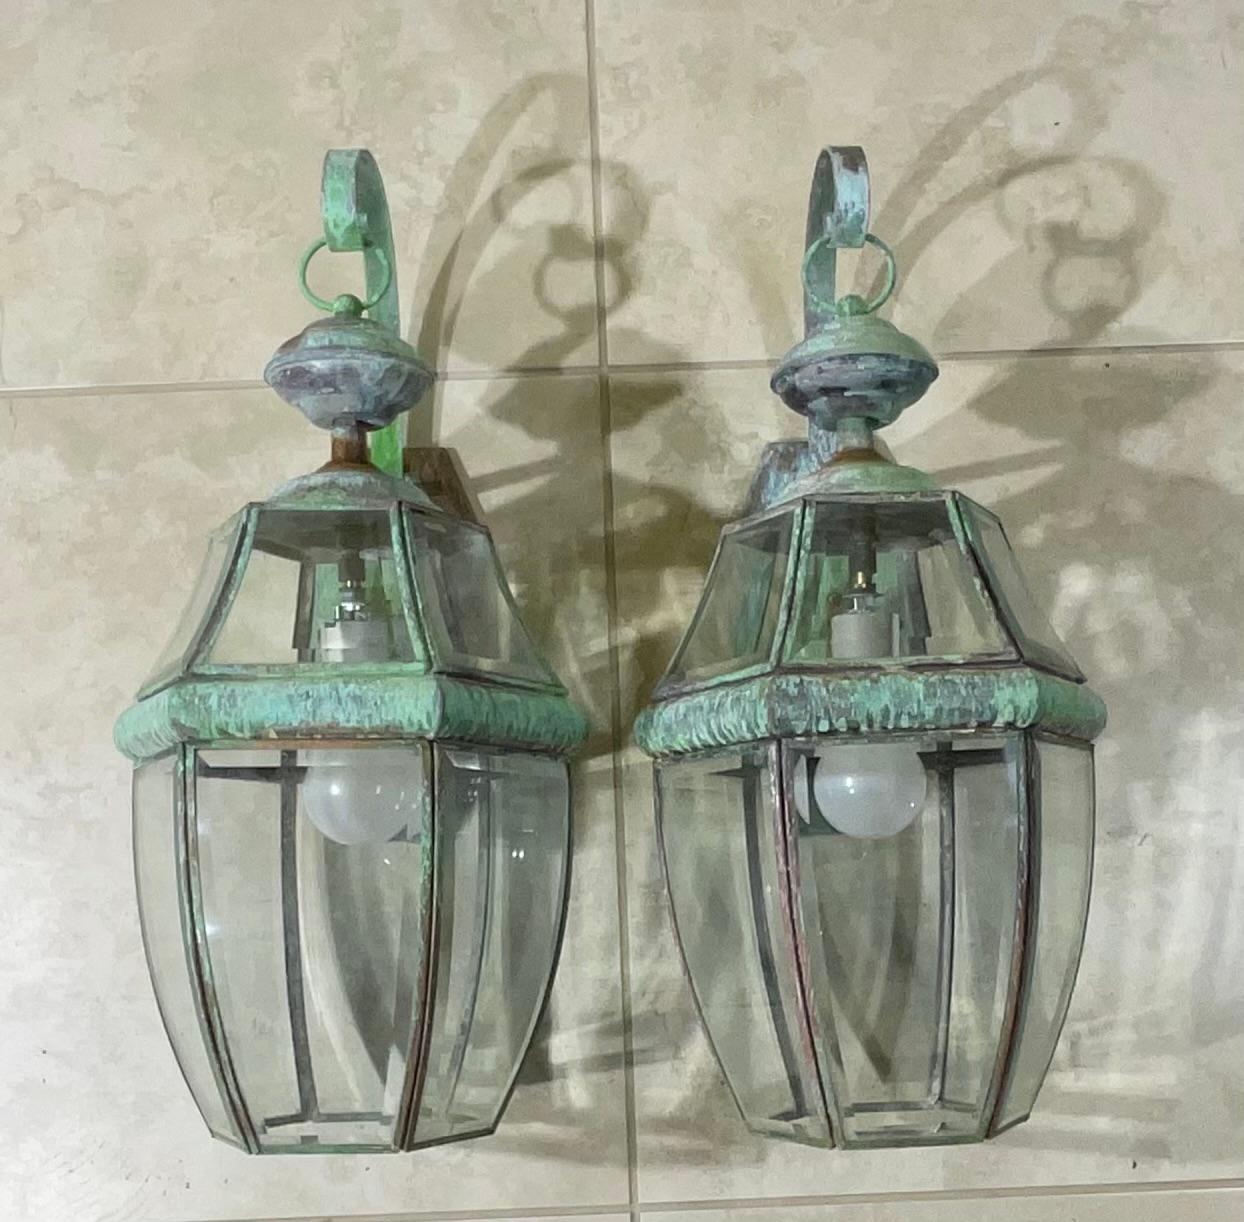 Hand-Crafted Pair of Vintage Solid Brass Wall Lantern